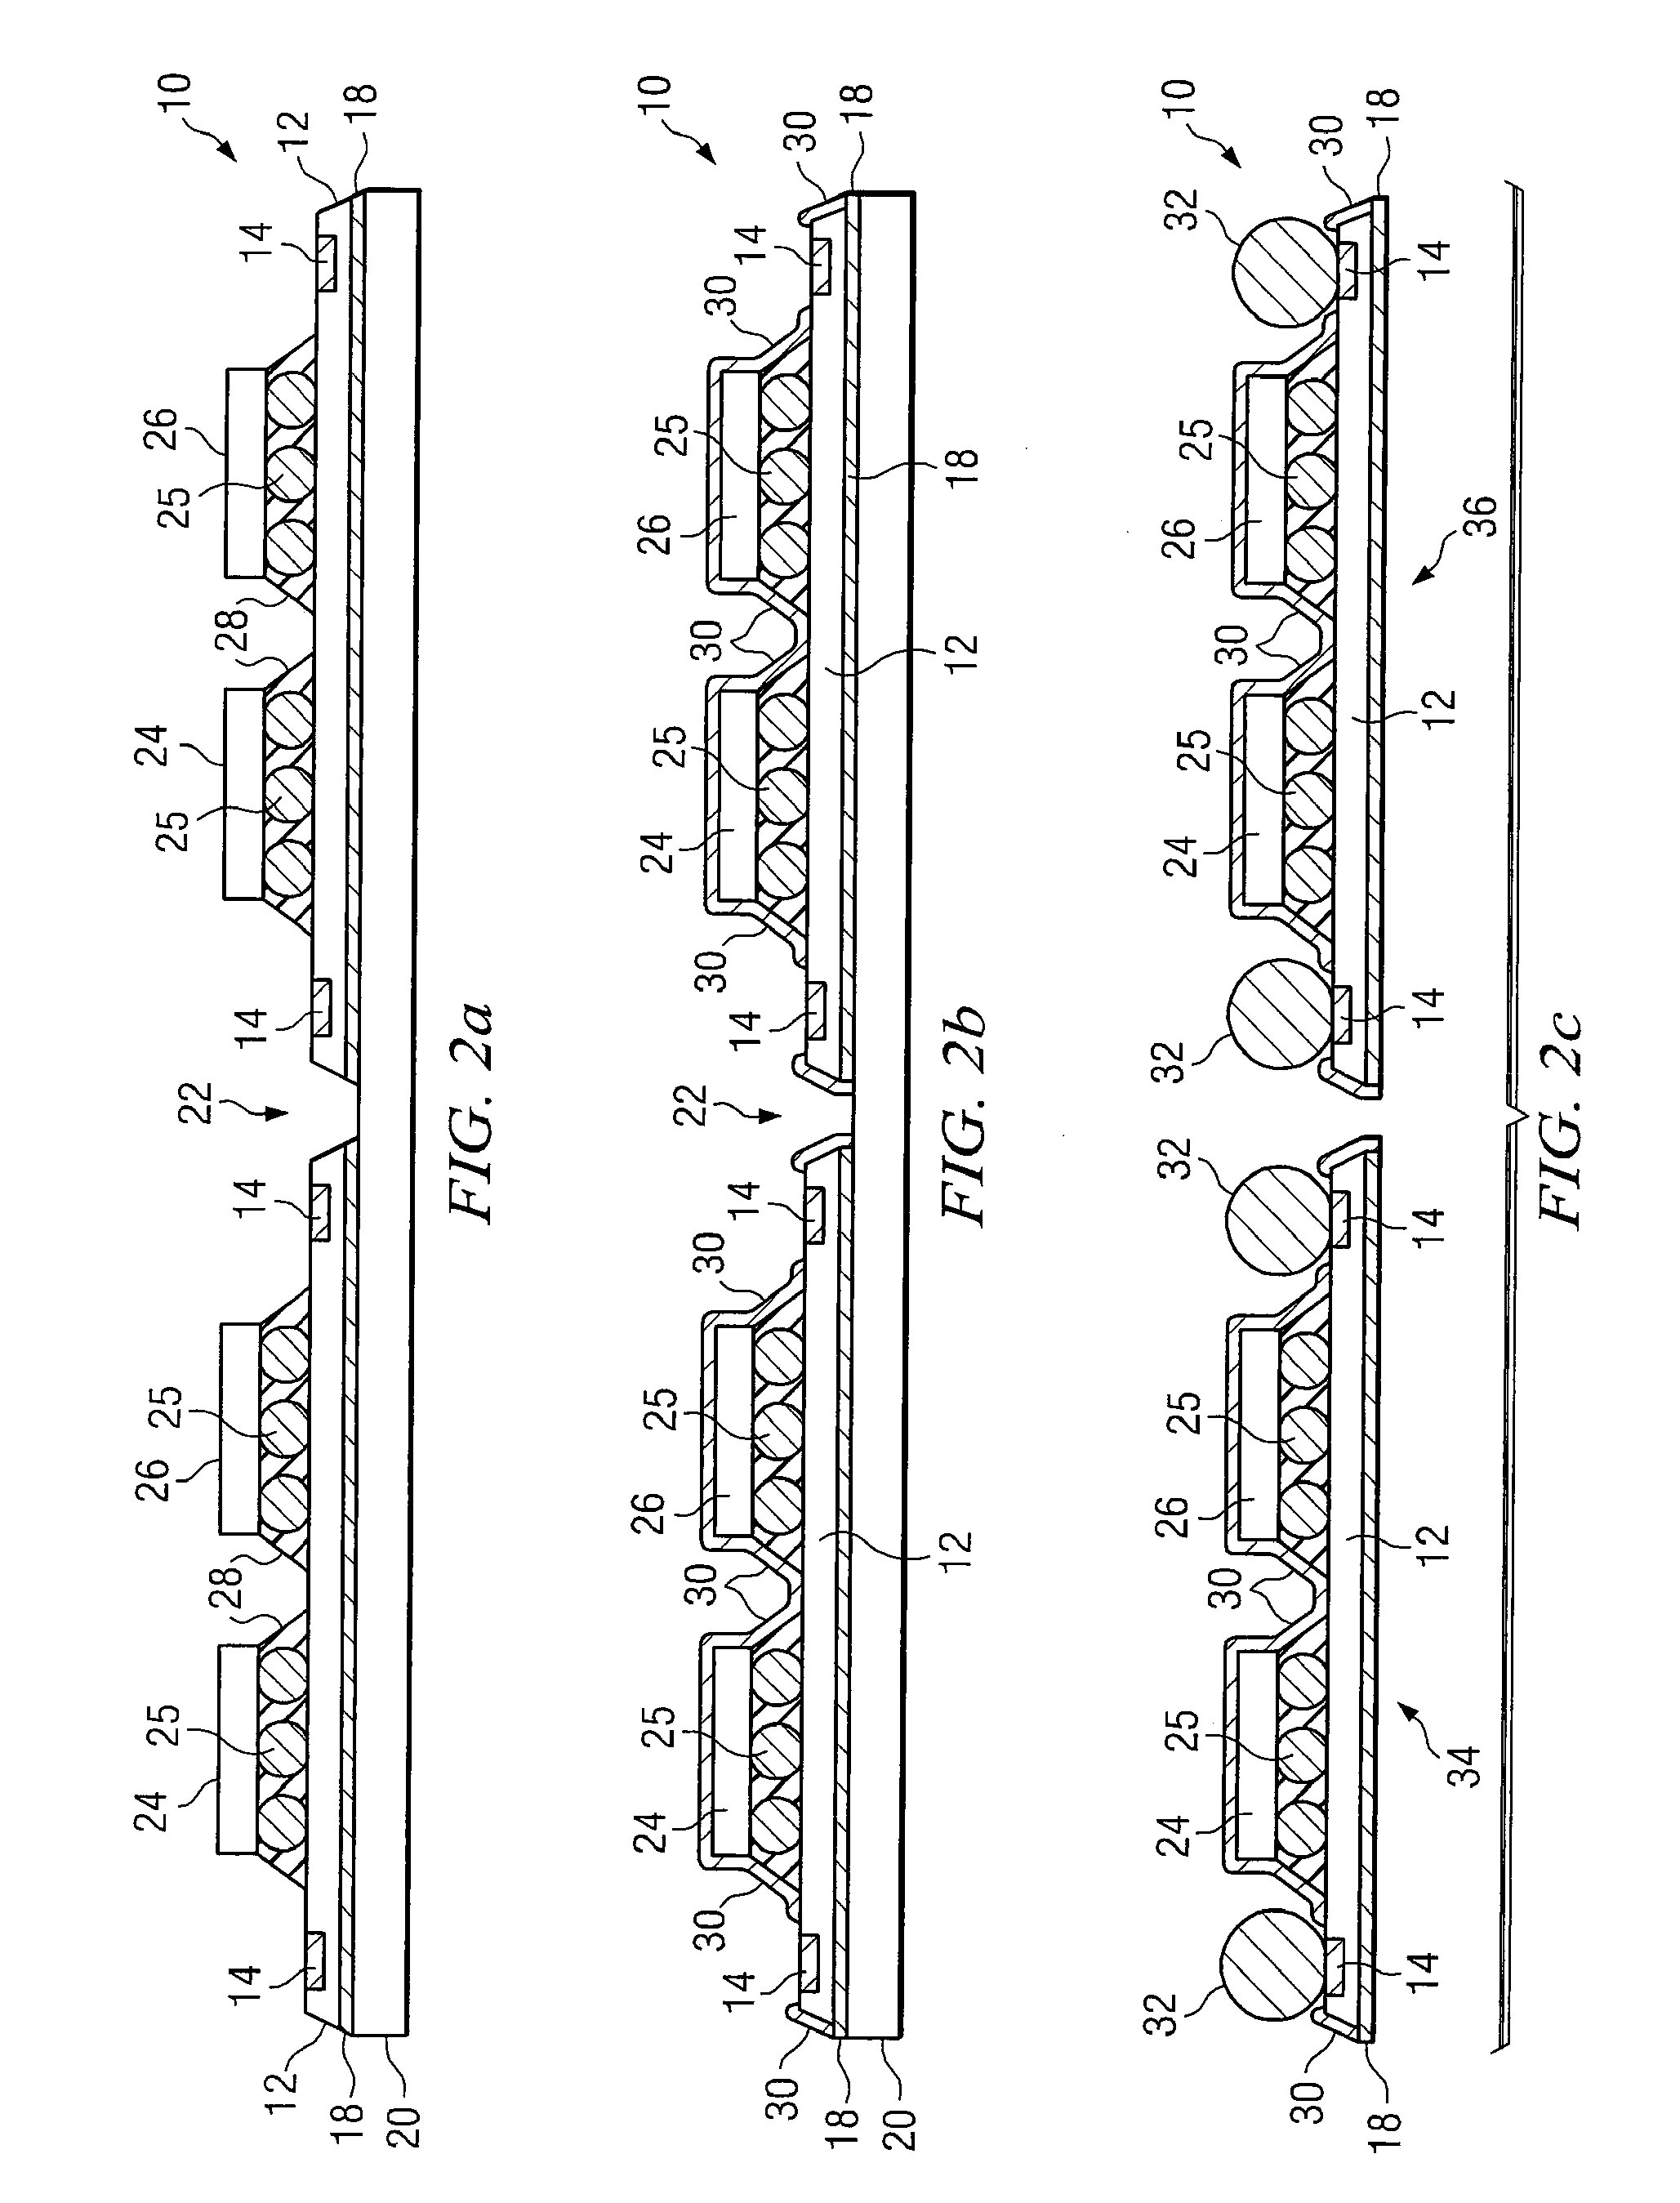 Semiconductor Package and Method of Reducing Electromagnetic Interference Between Devices